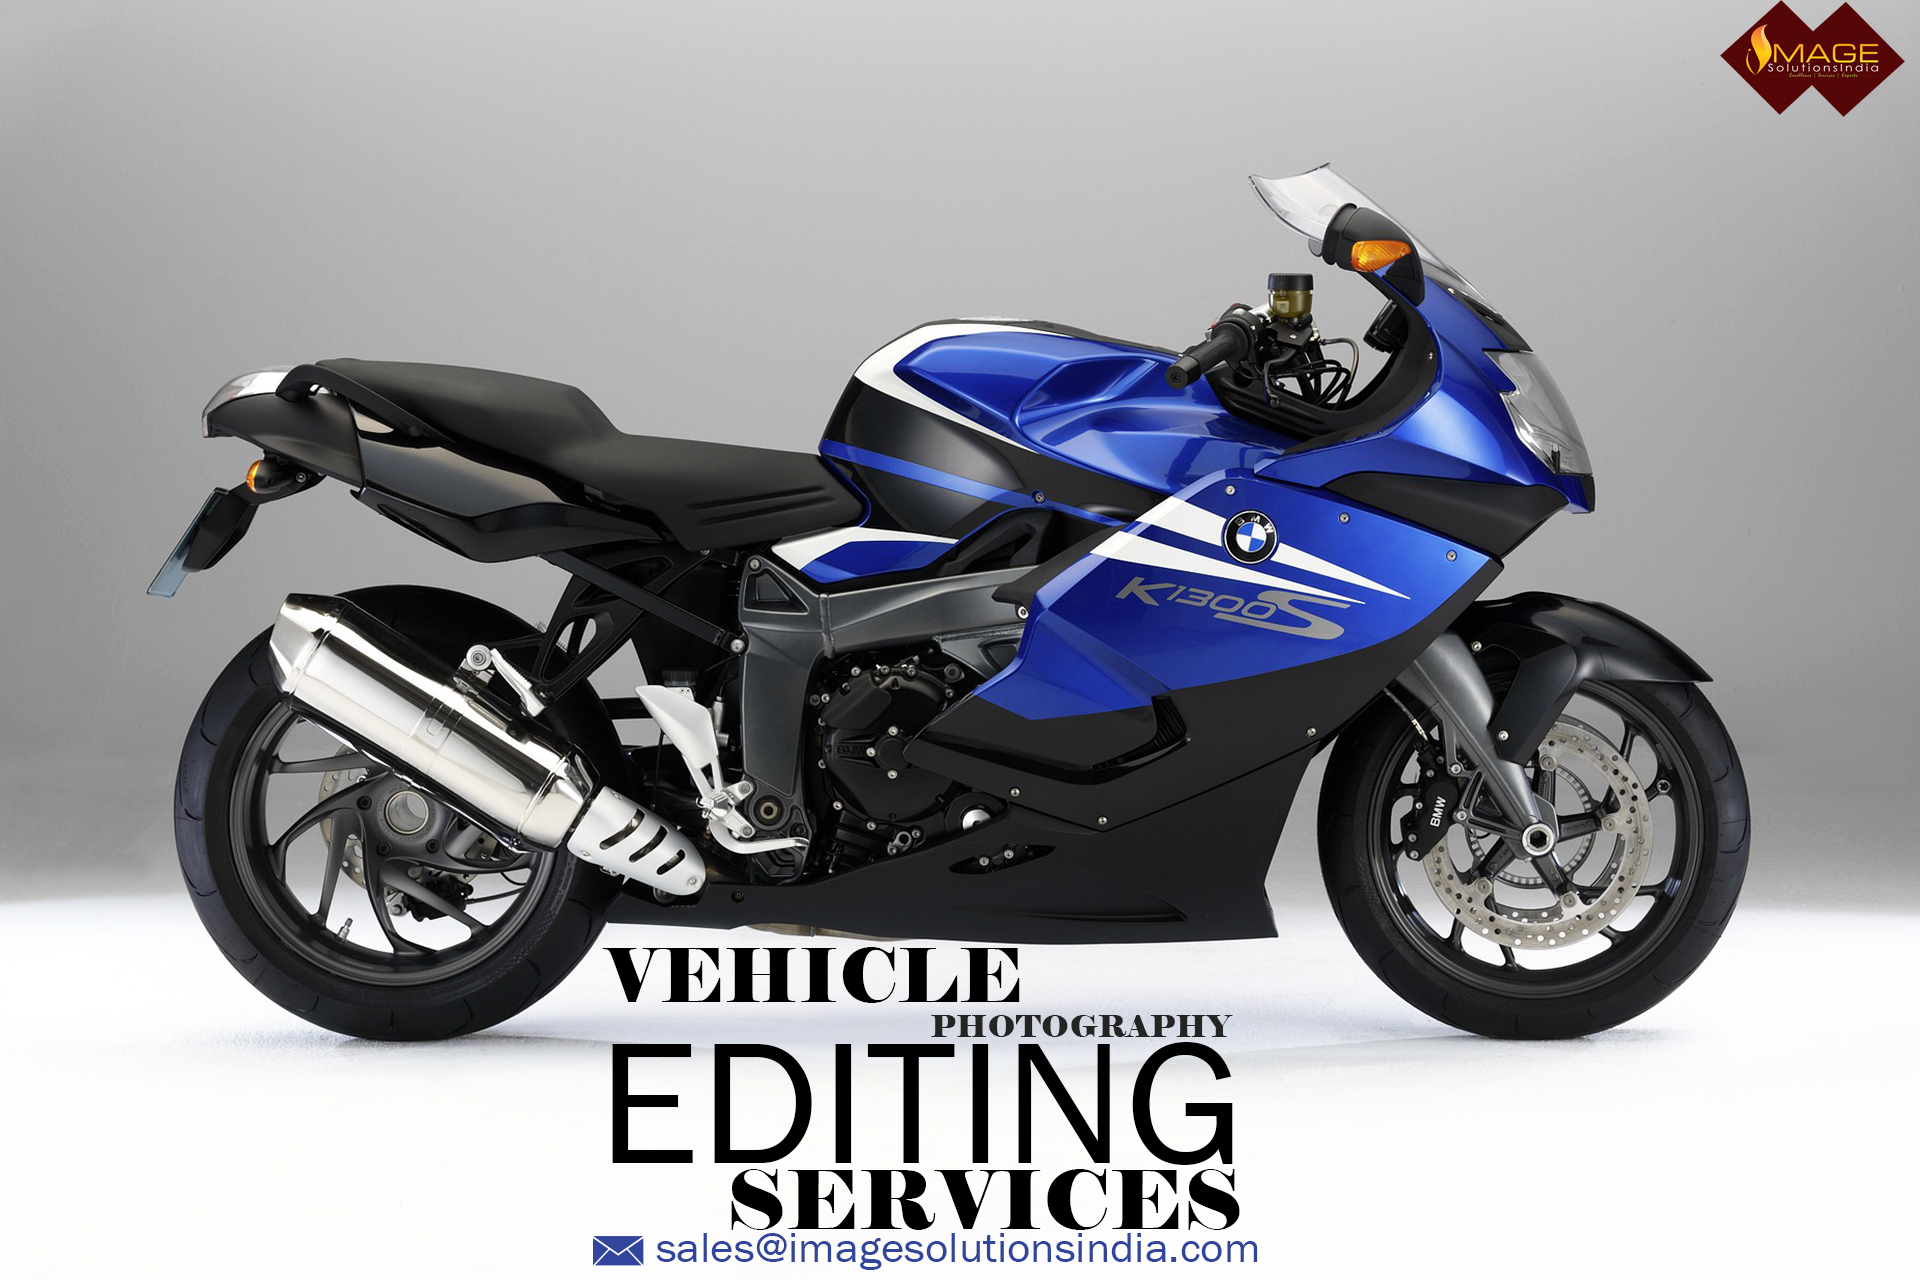 Vehicle Photo Editing Services | Retouching Trucks, Cars, Buses, Bikes and Aircrafts Photographs